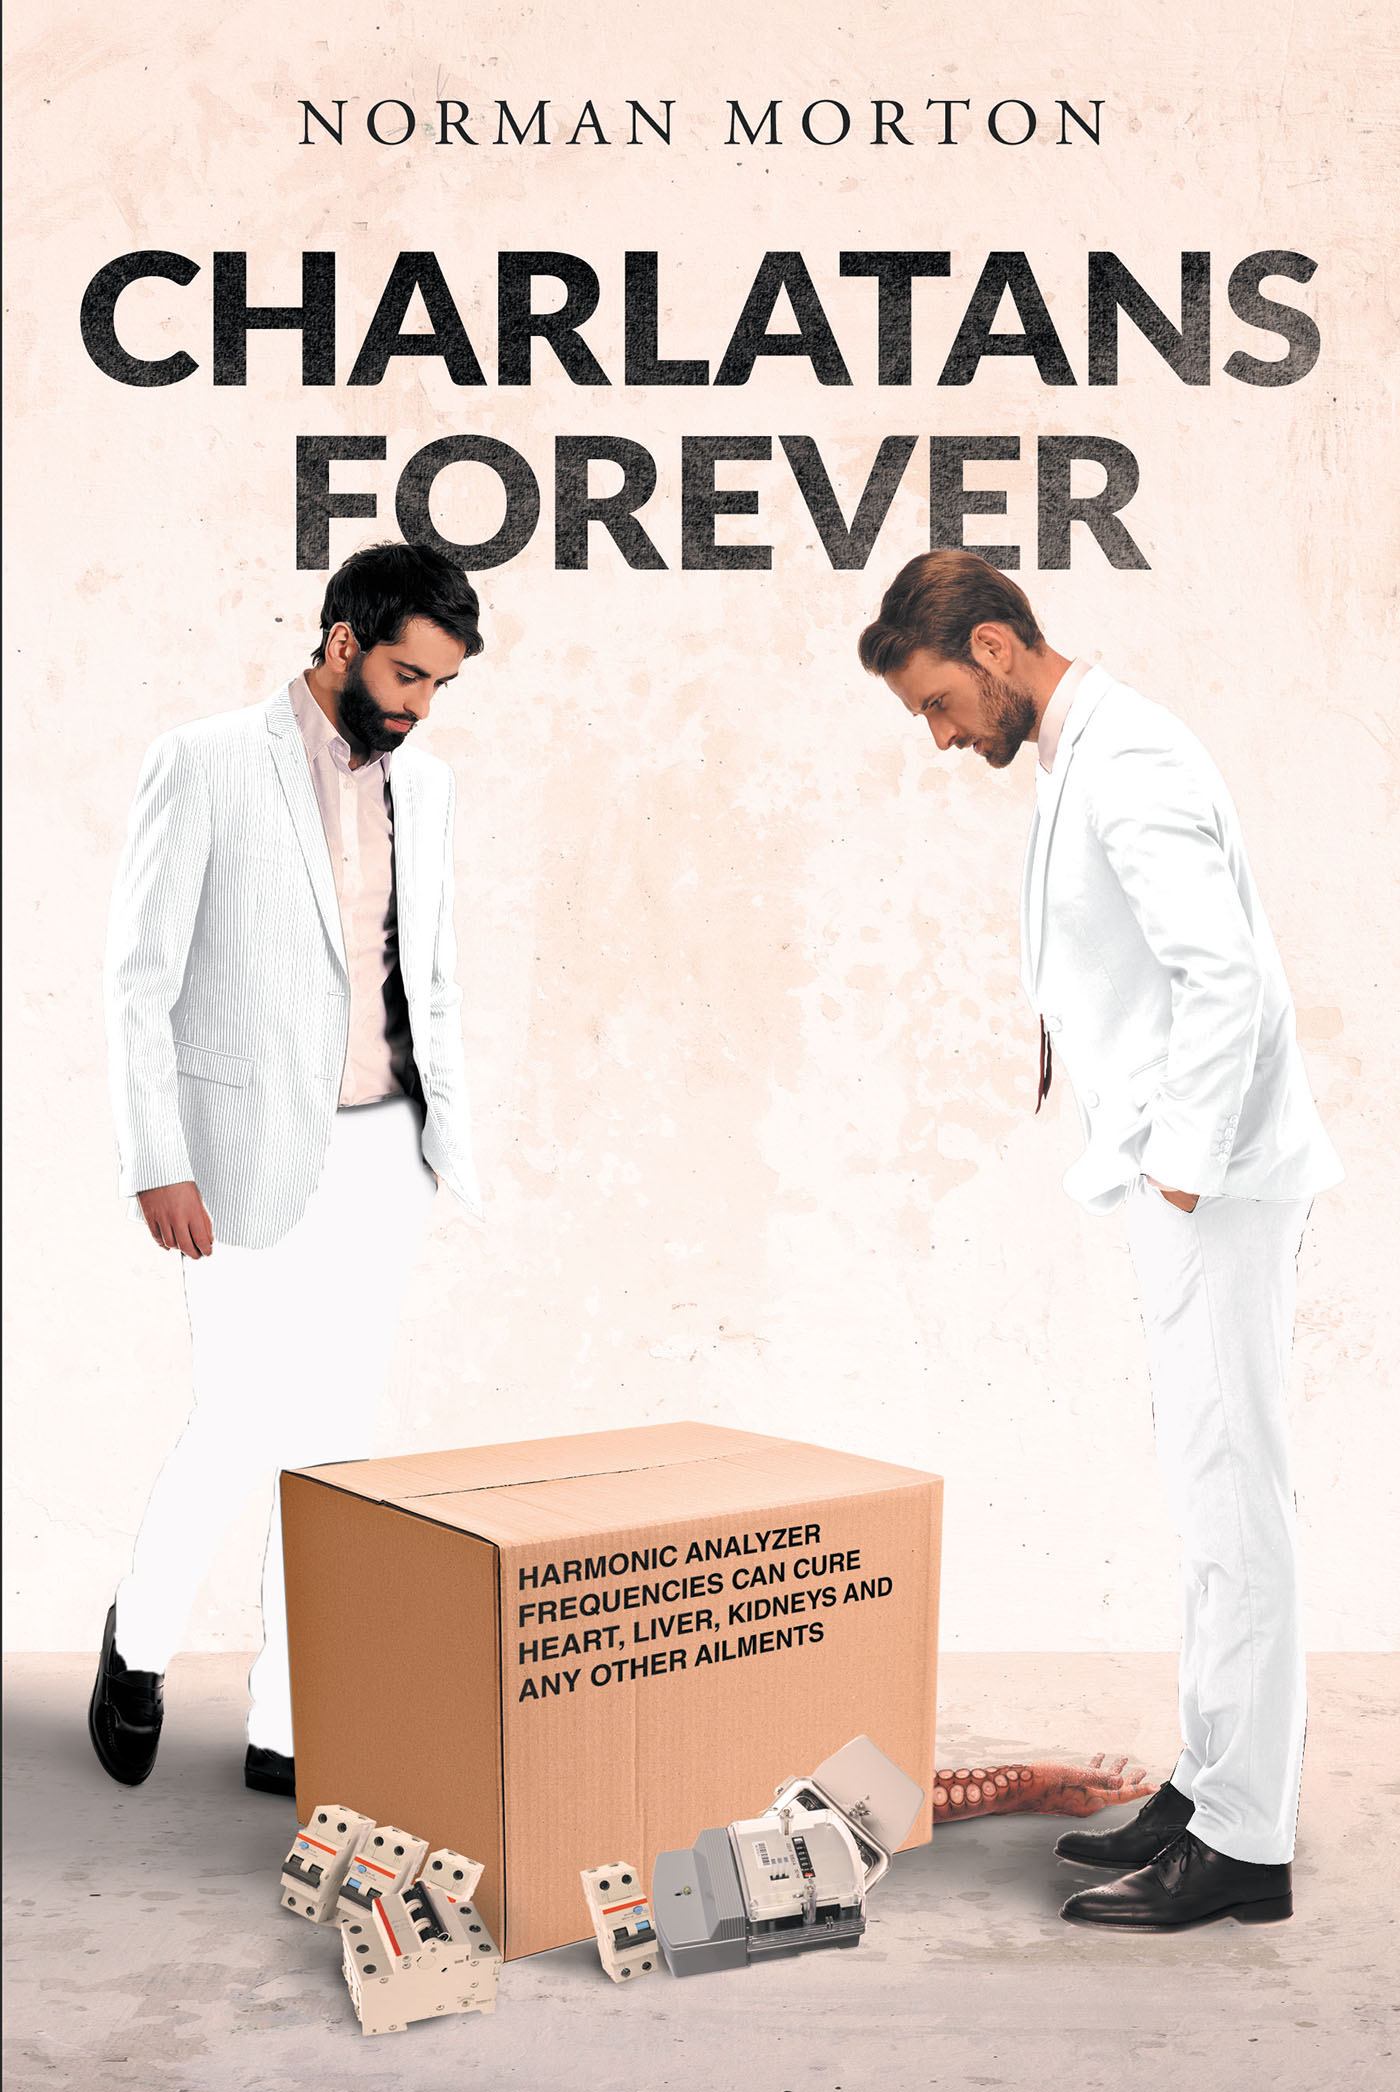 Norman Morton’s Newly Released, "Charlatans Forever," Explores the Timeless Tactics of Deception